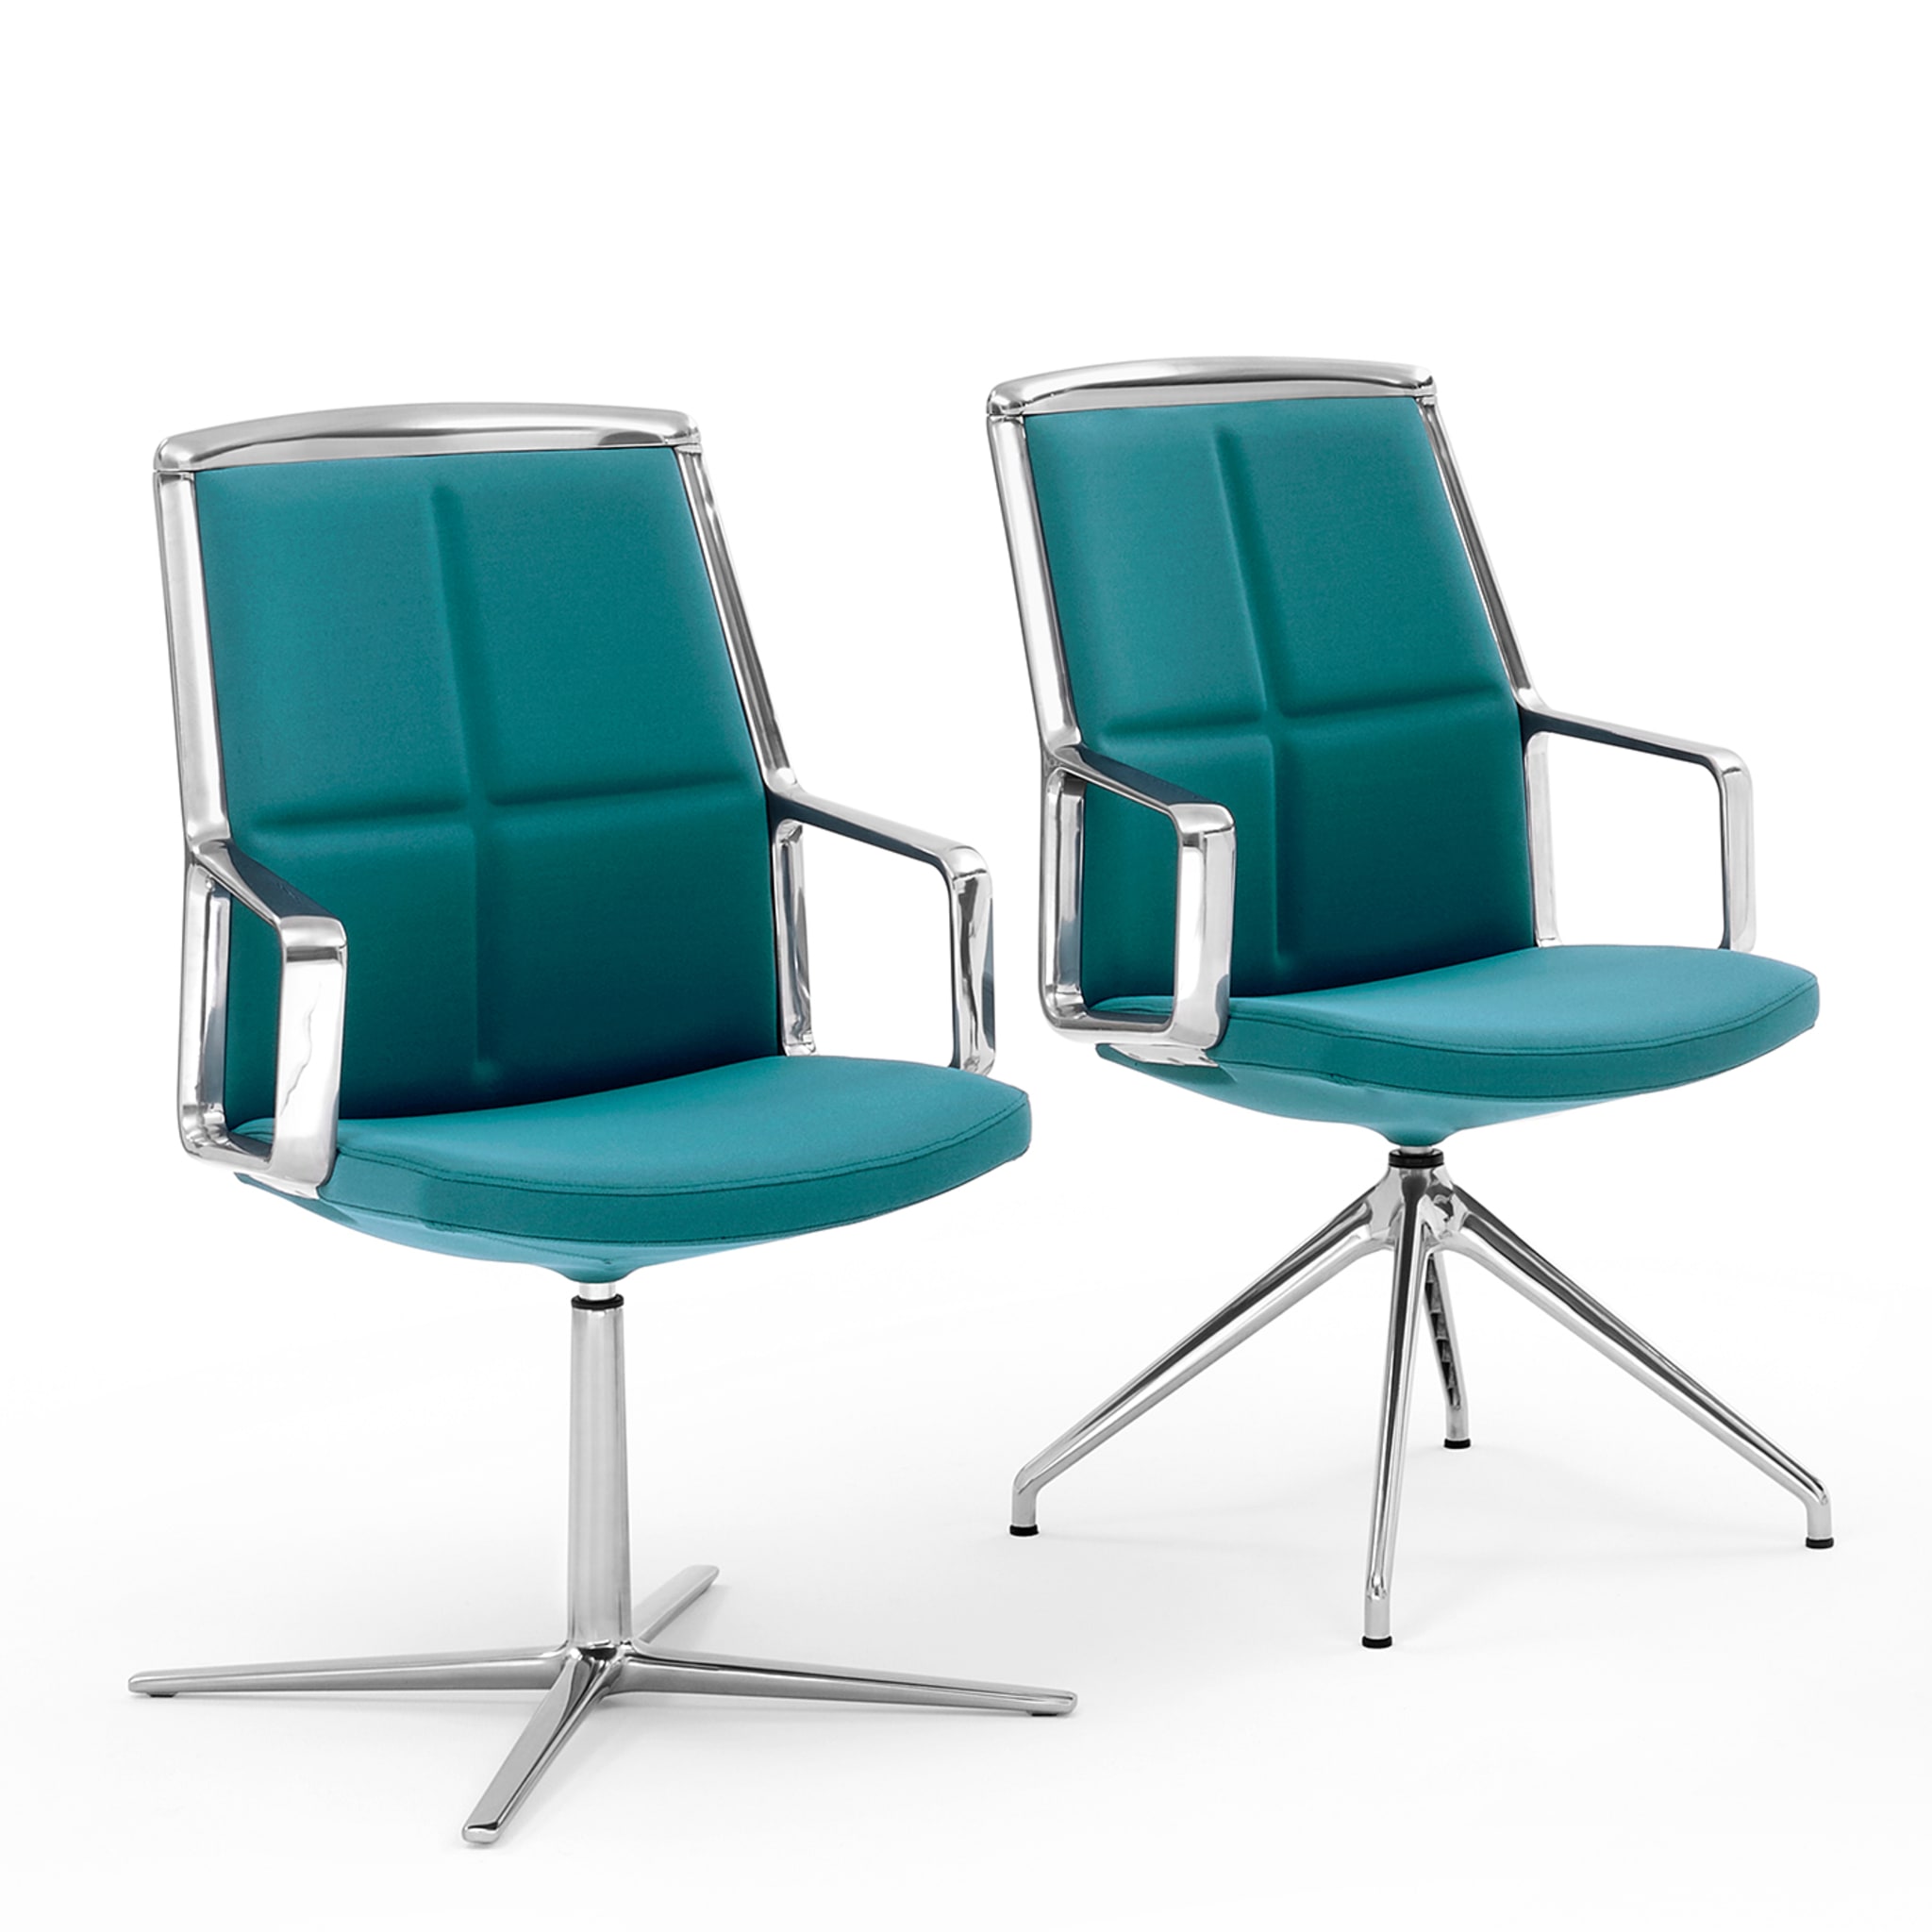 ADELE BLUE-GREEN MEETING CHAIR #2 by ORLANDINIDESIGN - Alternative view 1